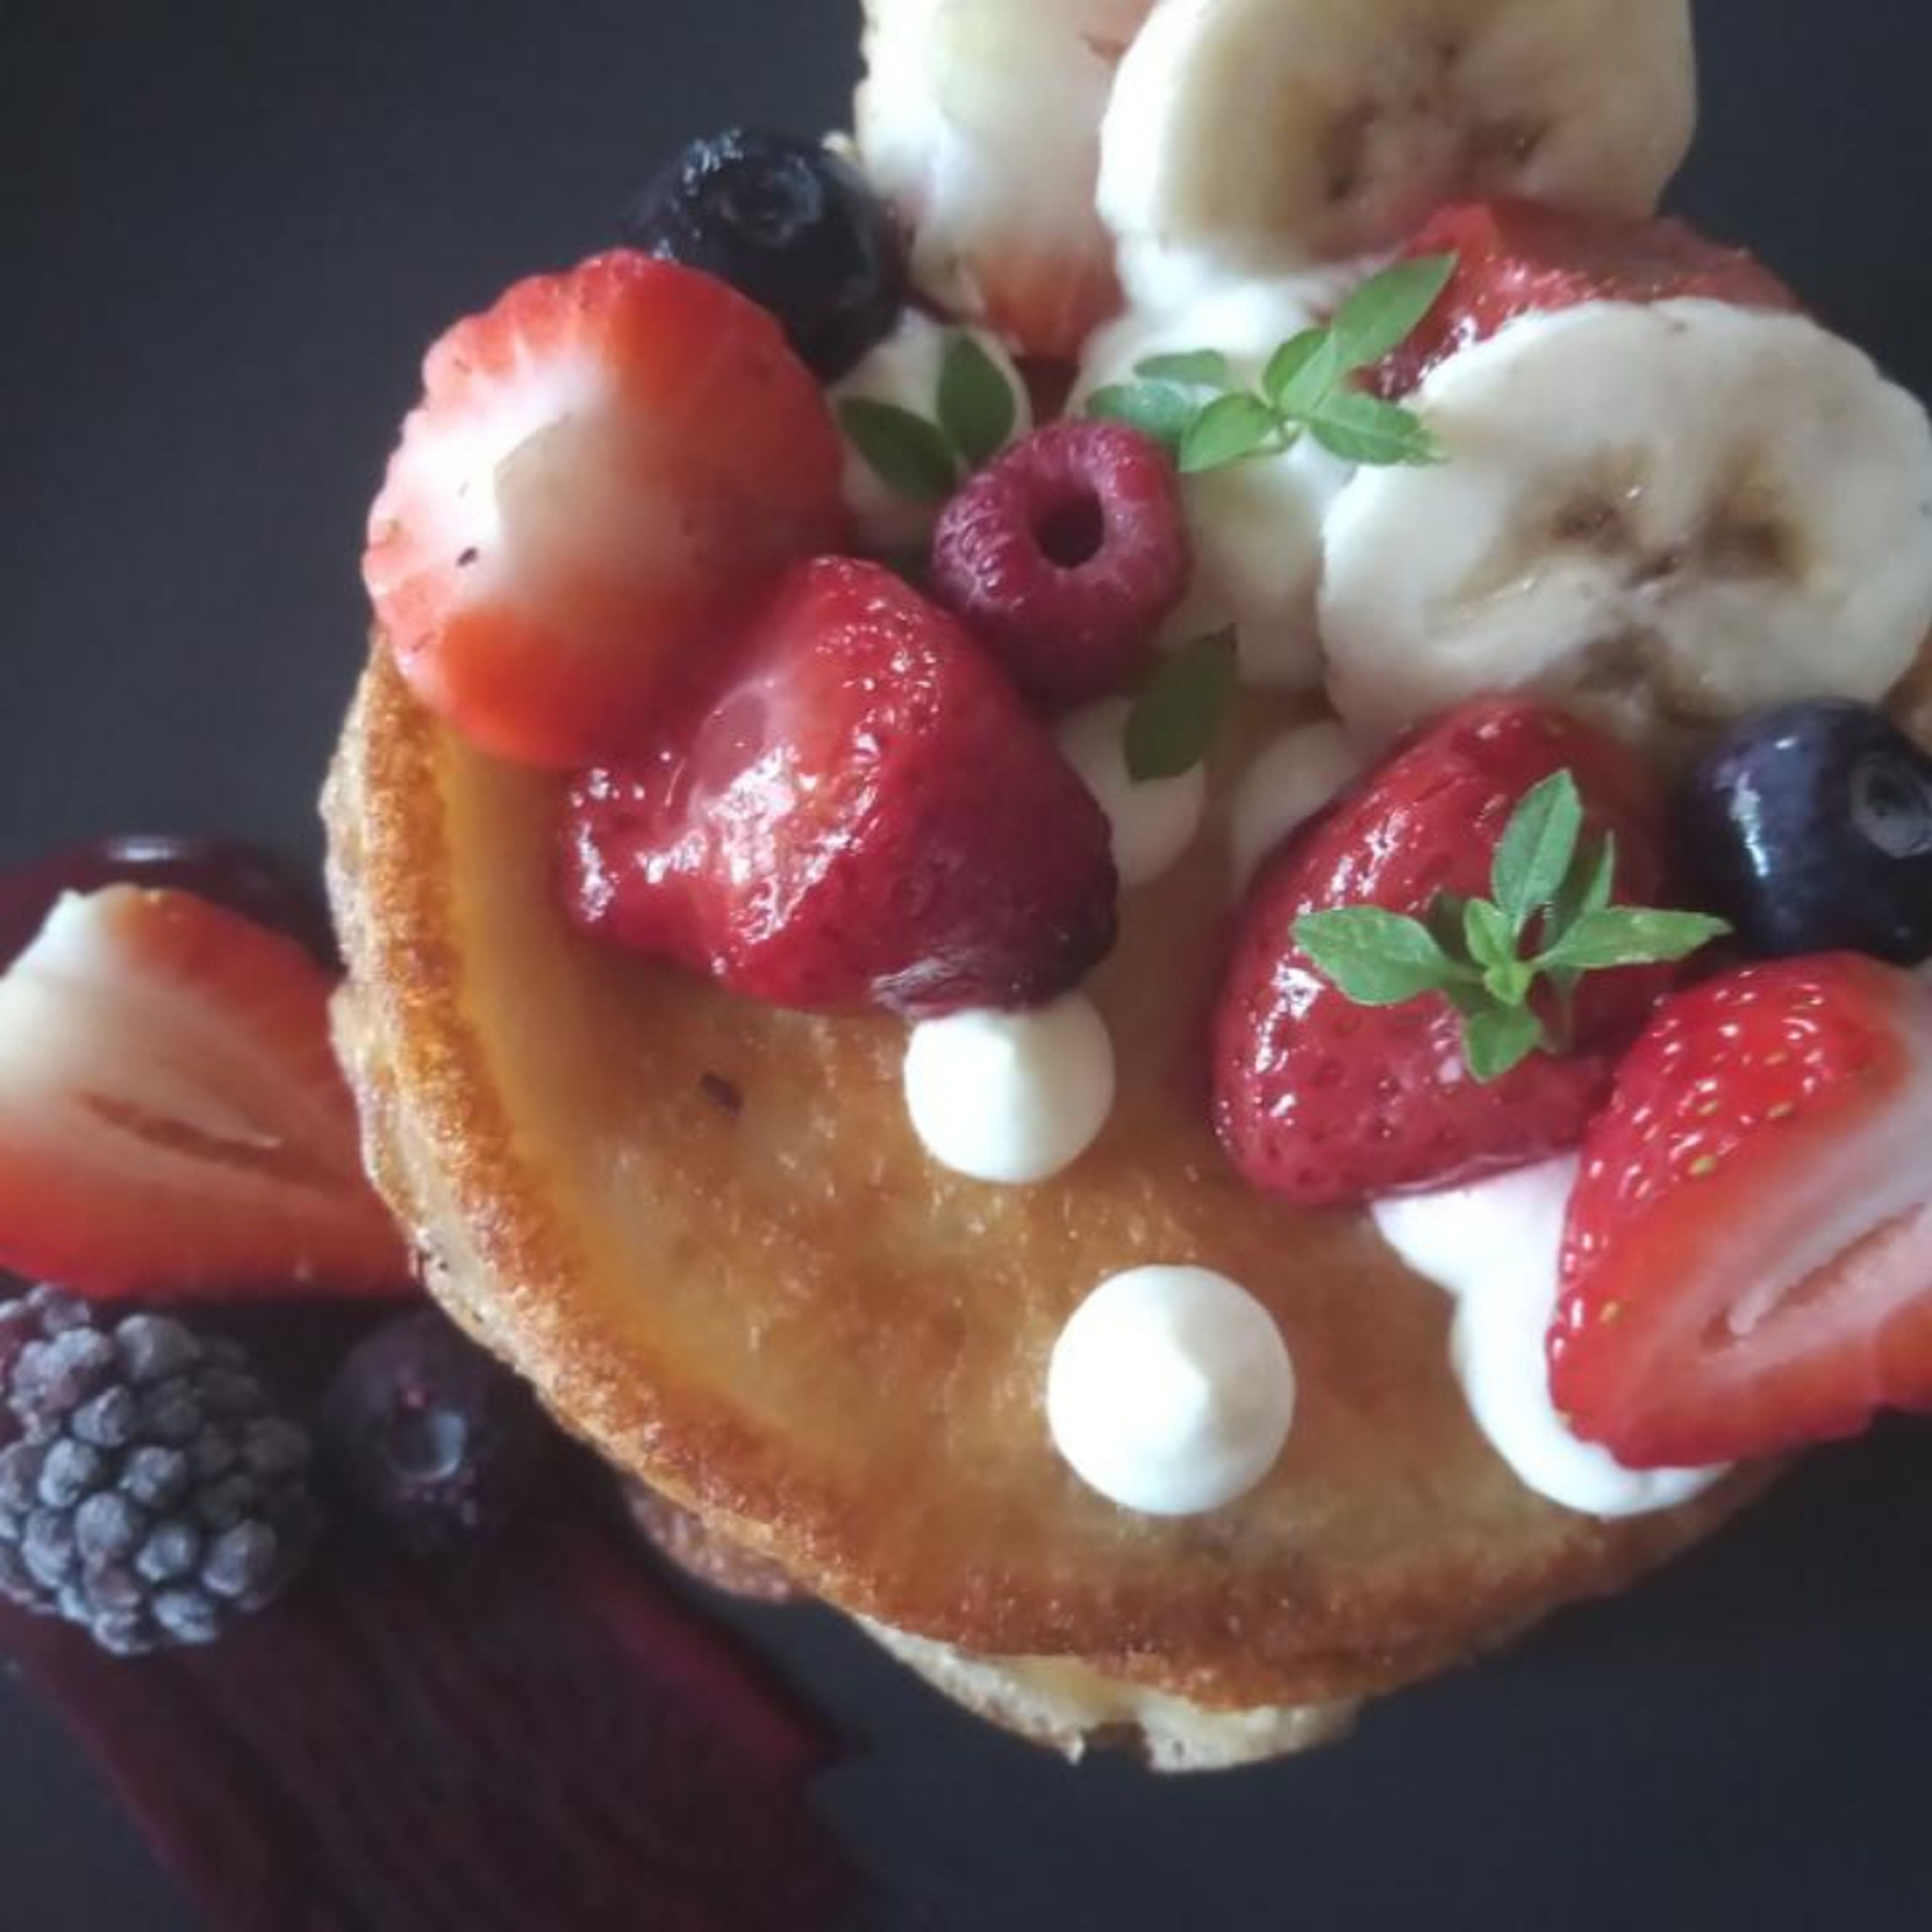 Plate up the dish. Start by stacking pancakes on a black plate, with a thin layer of whipped ricotta between each pancake. Pipe on whipped ricotta, add roasted strawberries and fresh fruit. Top with micro herbs and add berry puree.